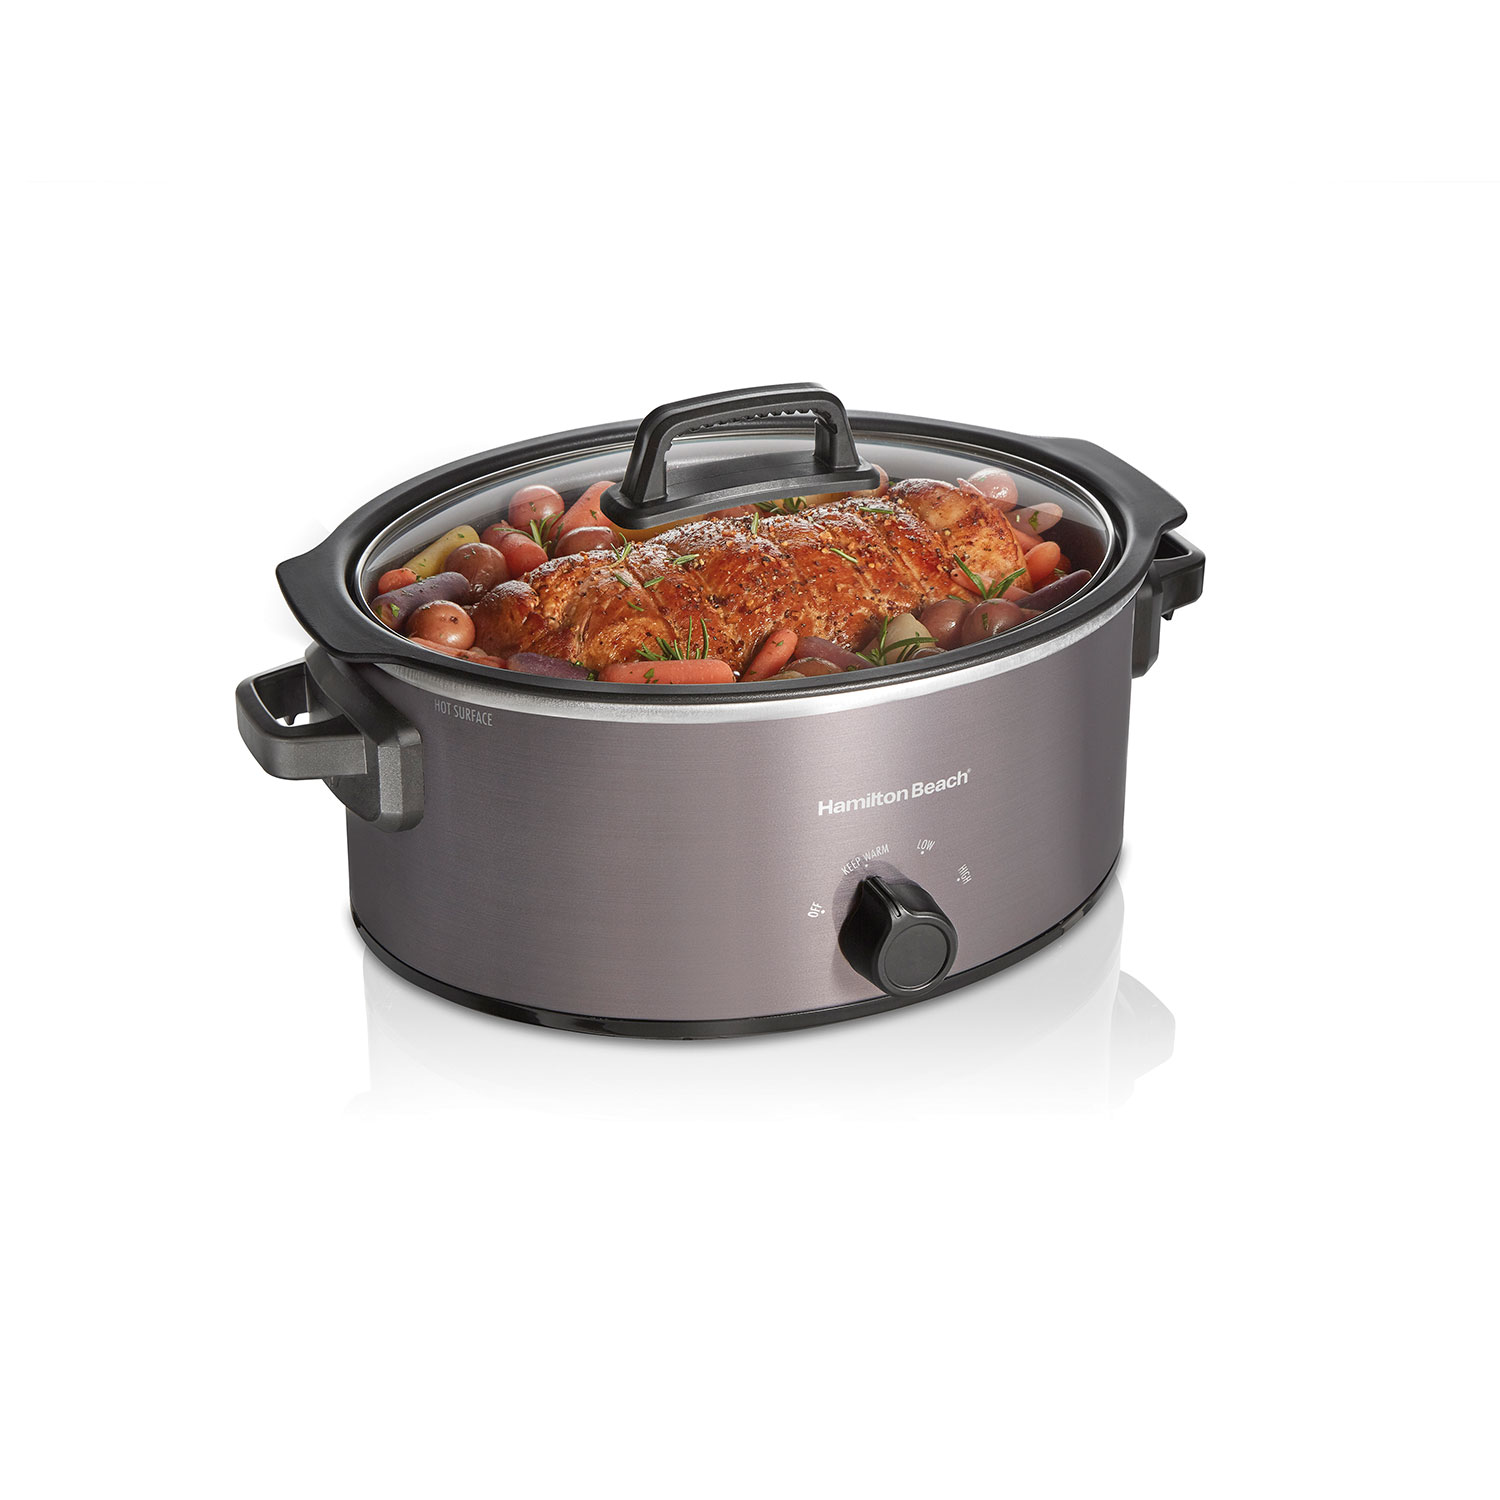 6 Quart Stovetop Sear & Cook Slow Cooker, Stainless Steel (33669)